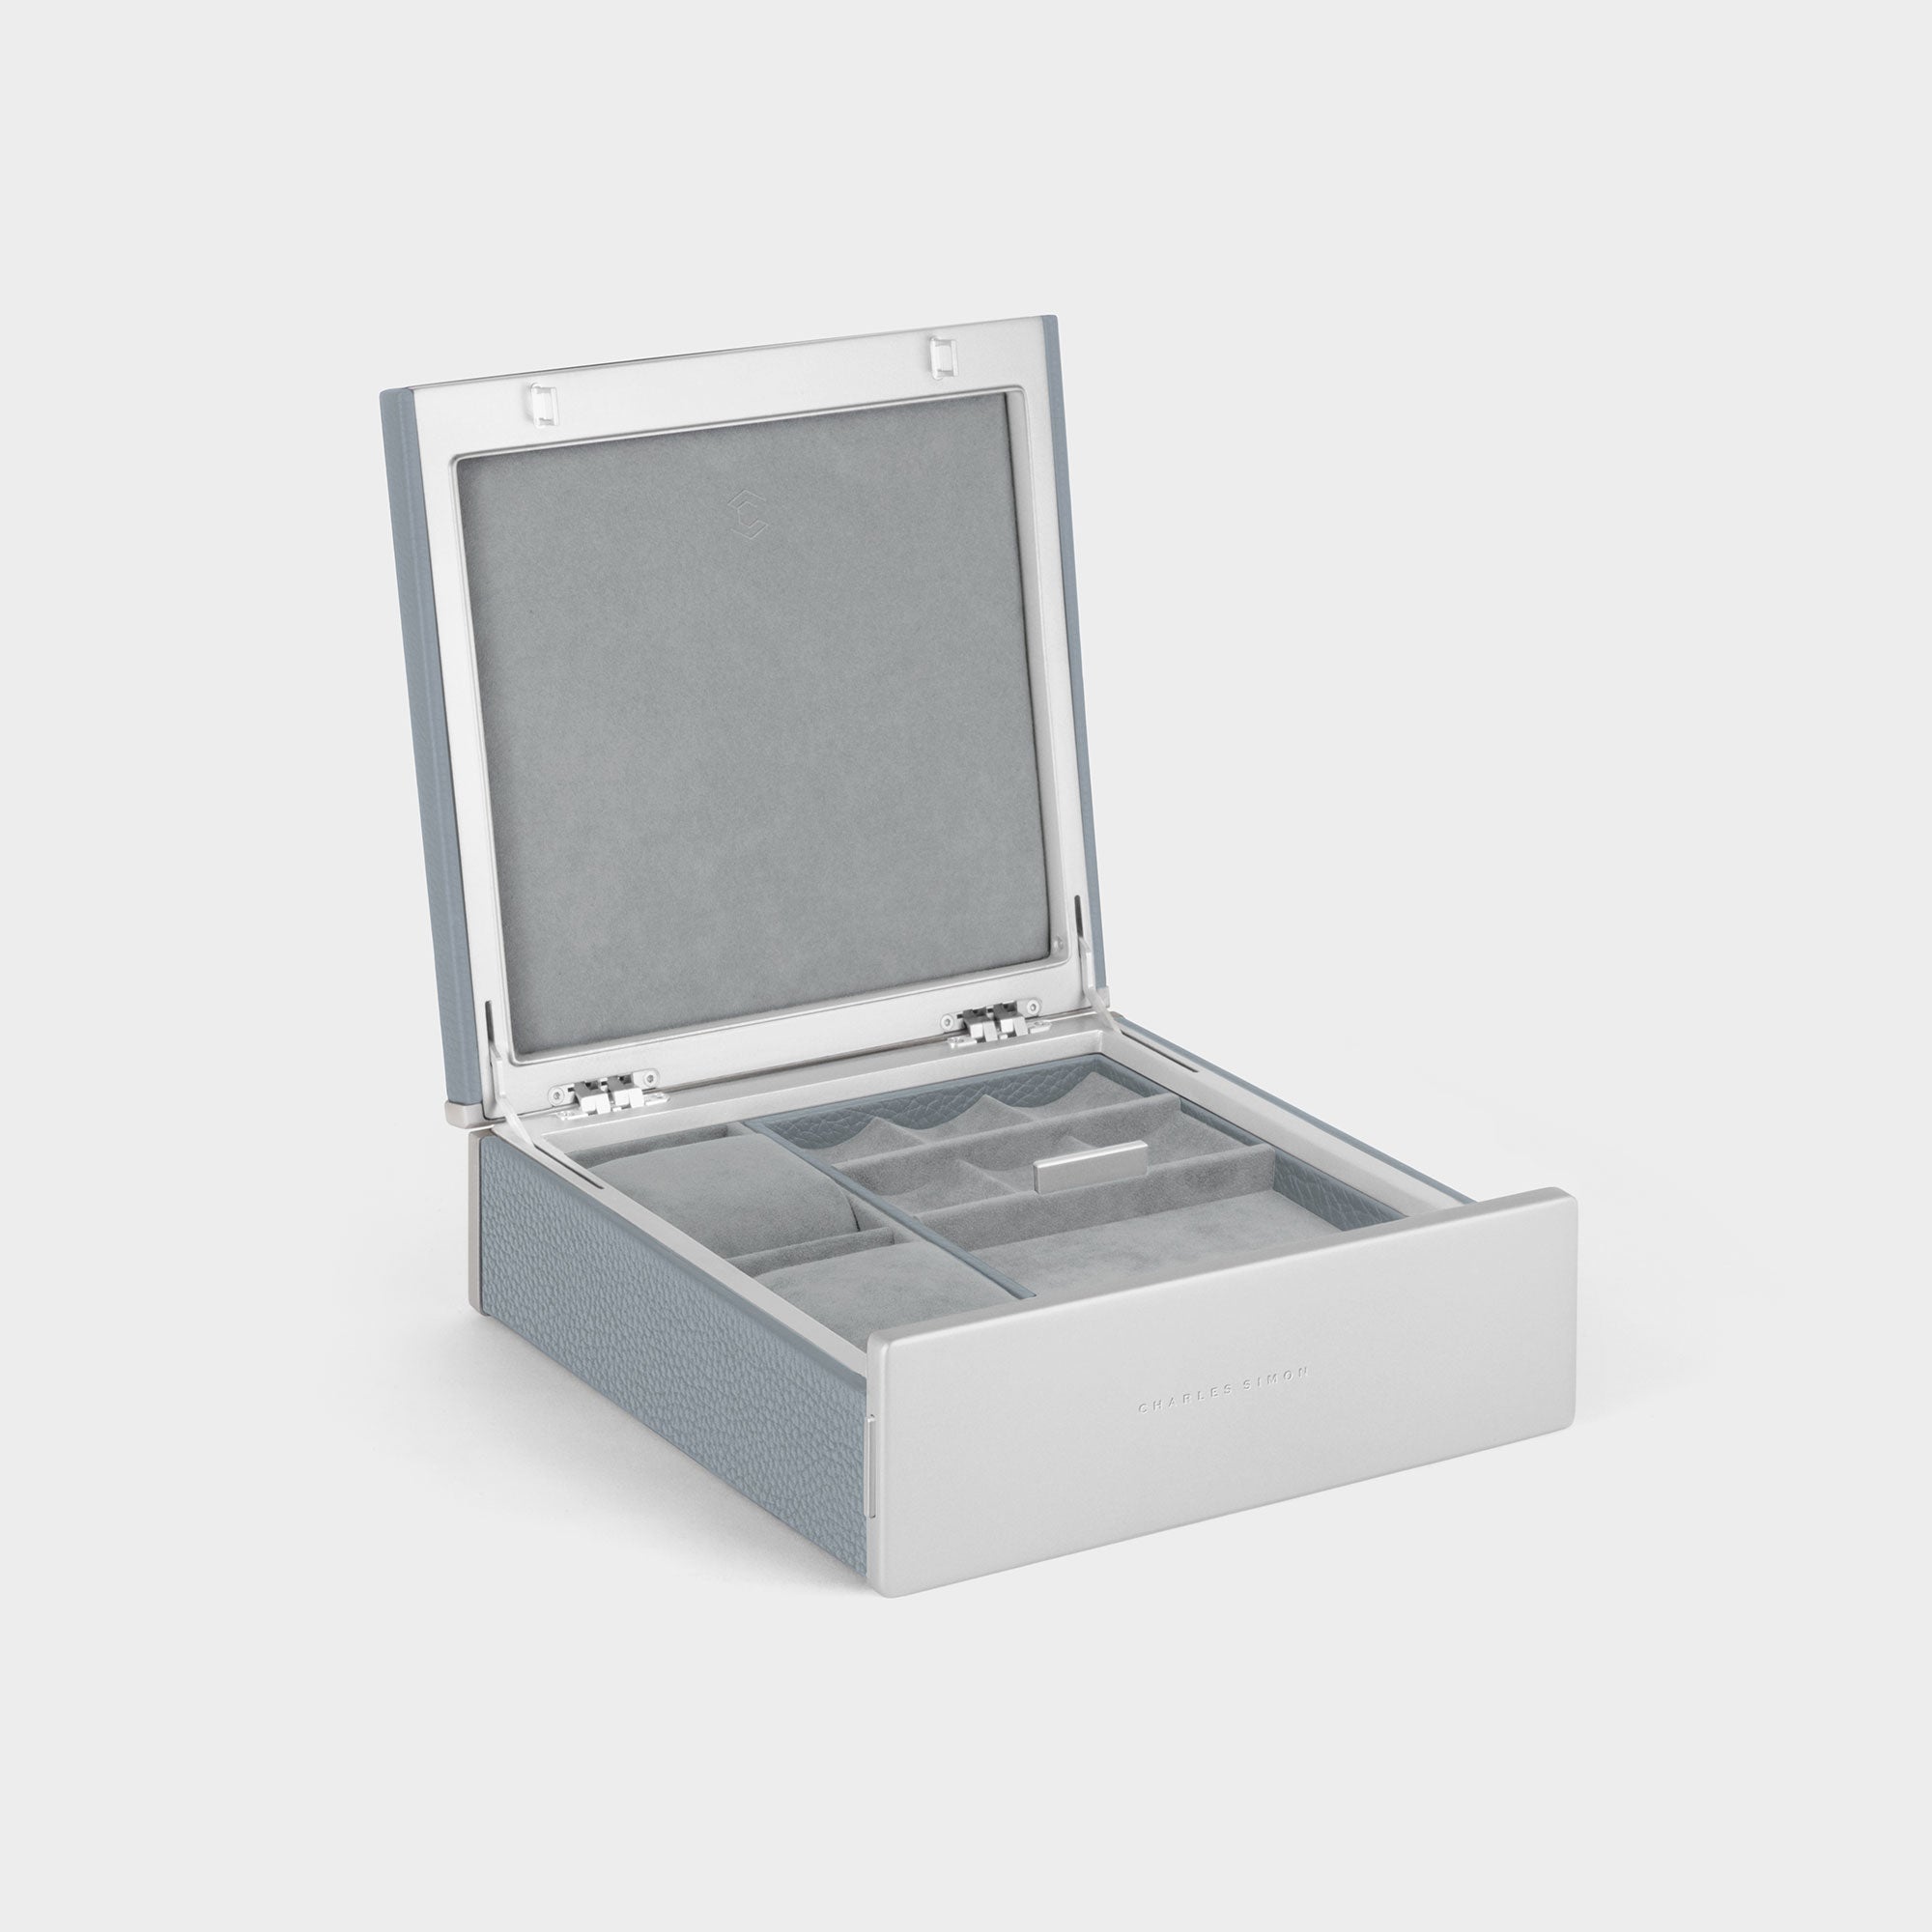 Product photo of open Taylor 2 Watch and Jewelry box in cloud grey leather and fog grey interior showing jewelry storage compartments and two watch cushions